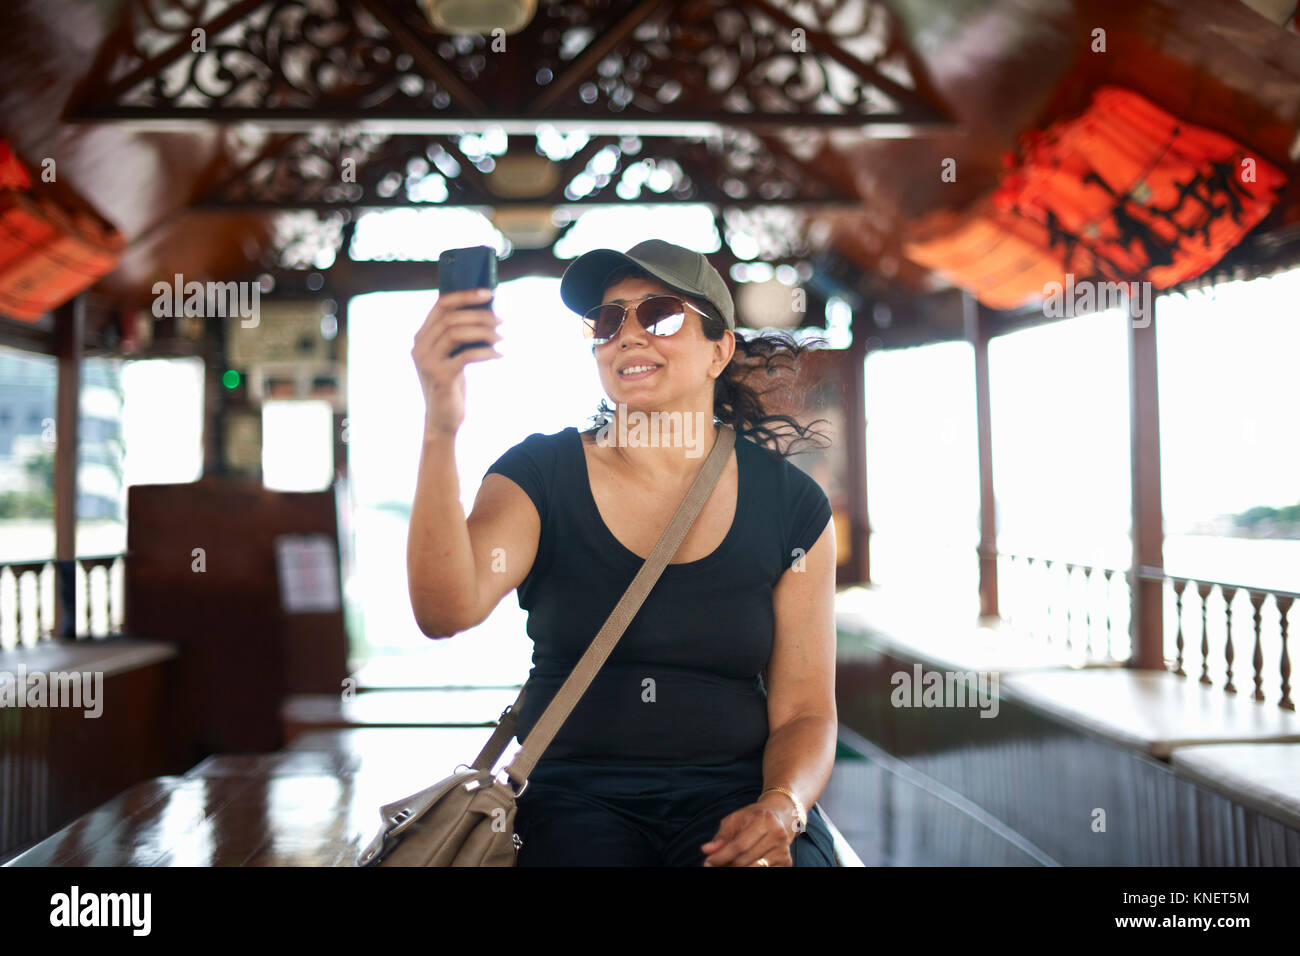 Woman with smartphone selfies smiling, Bangkok, Krung Thep, Thailande, Asie Banque D'Images